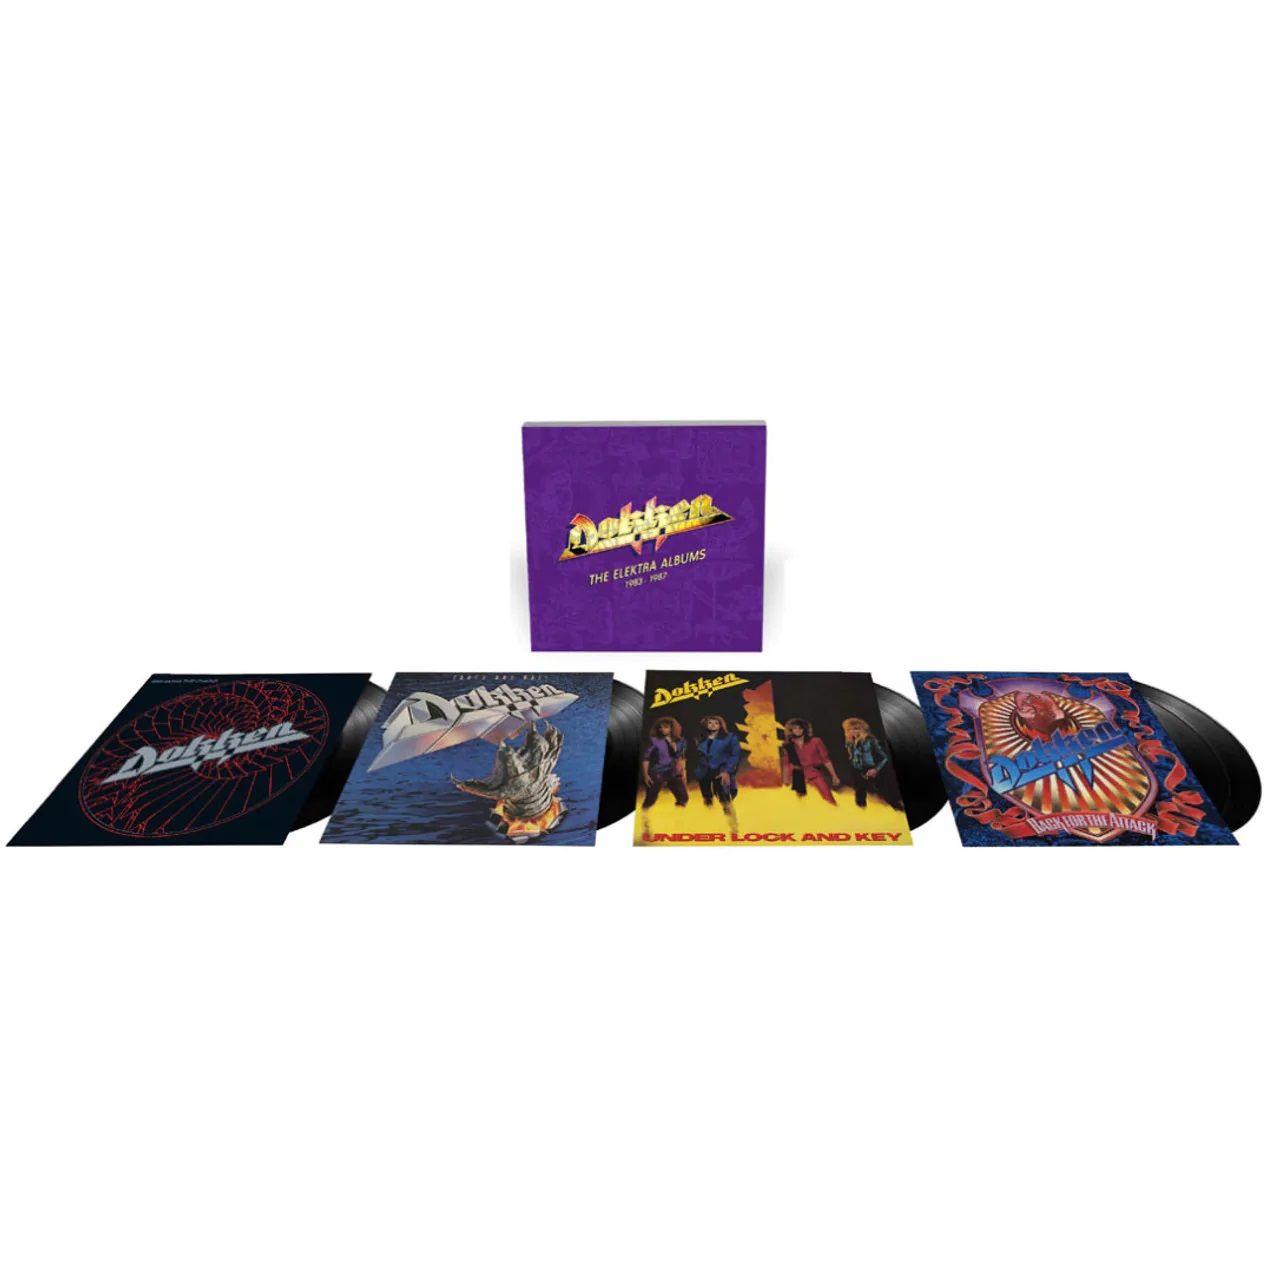 Dokken - Elektra Albums 1983-1987, The (Breaking The Chains/Tooth And Nail/Under Lock And Key/Back For The Attack) (180g 5LP Box Set) - Vinyl - New